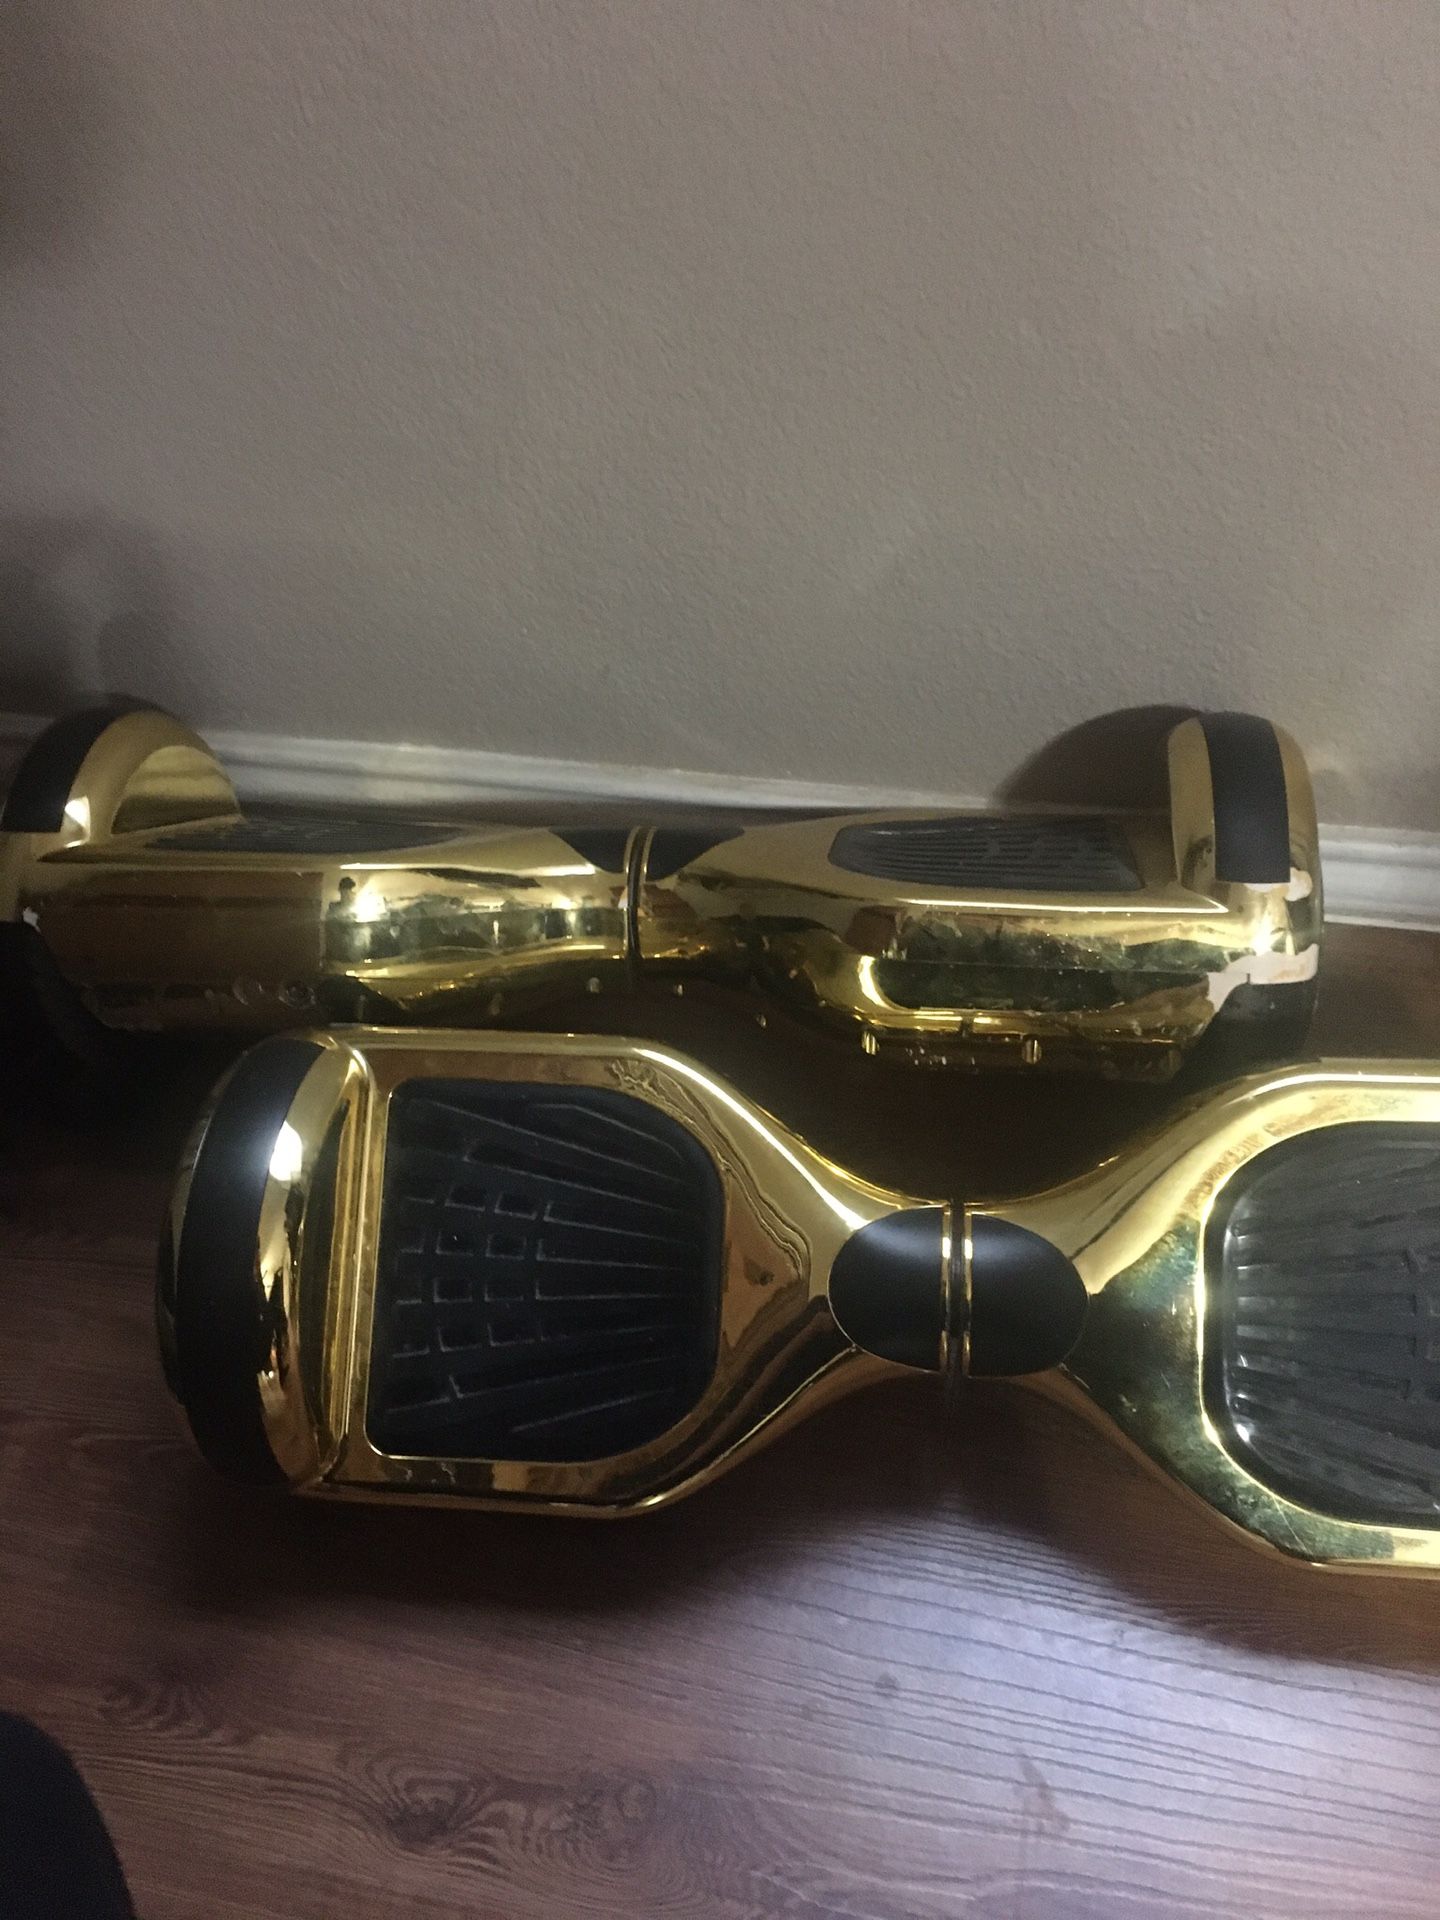 2 hoverboards